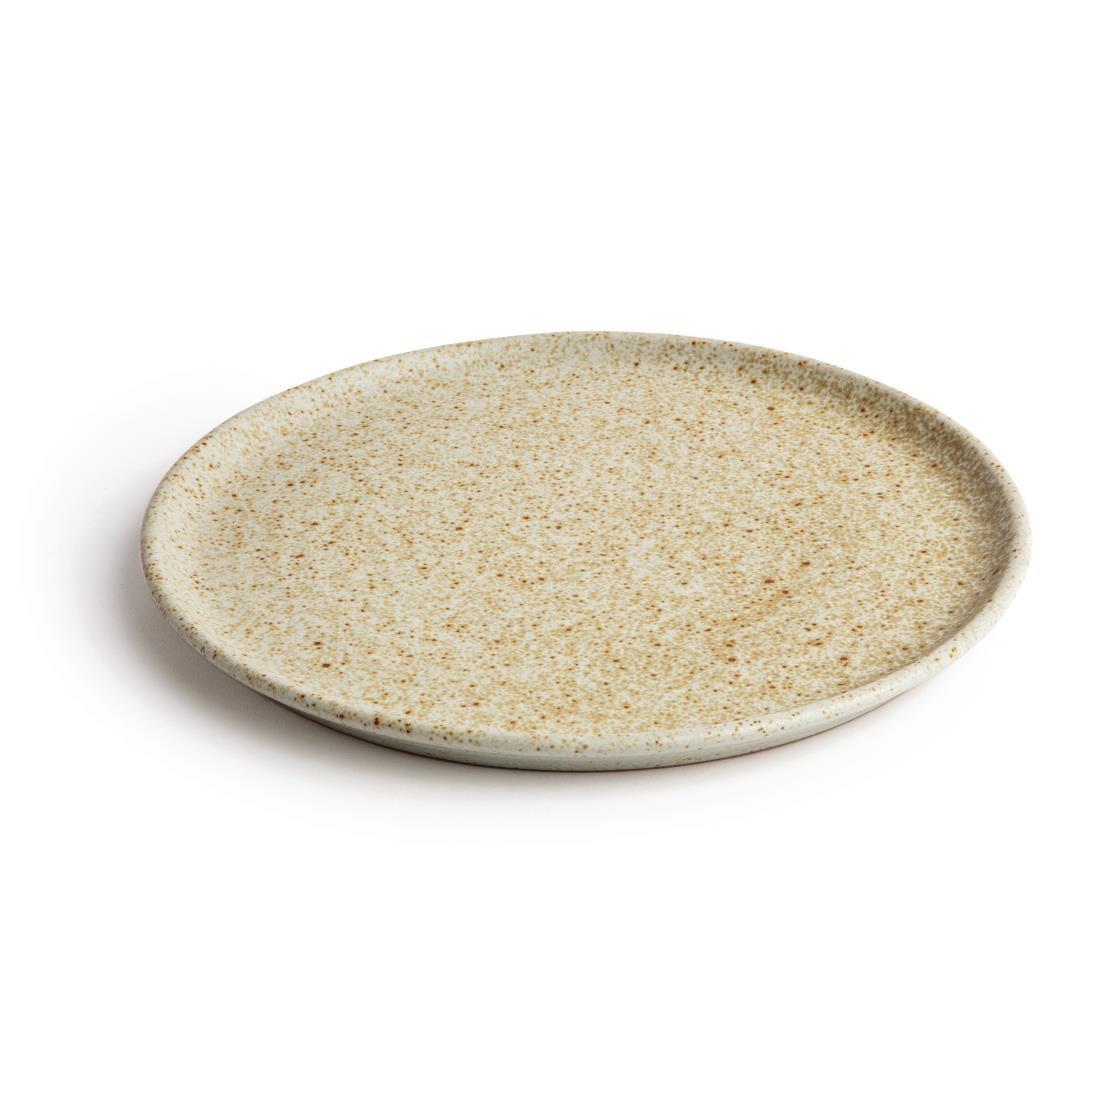 Olympia Canvas Small Rim Round Plate Wheat 265mm (Pack of 6) - FA338  - 2